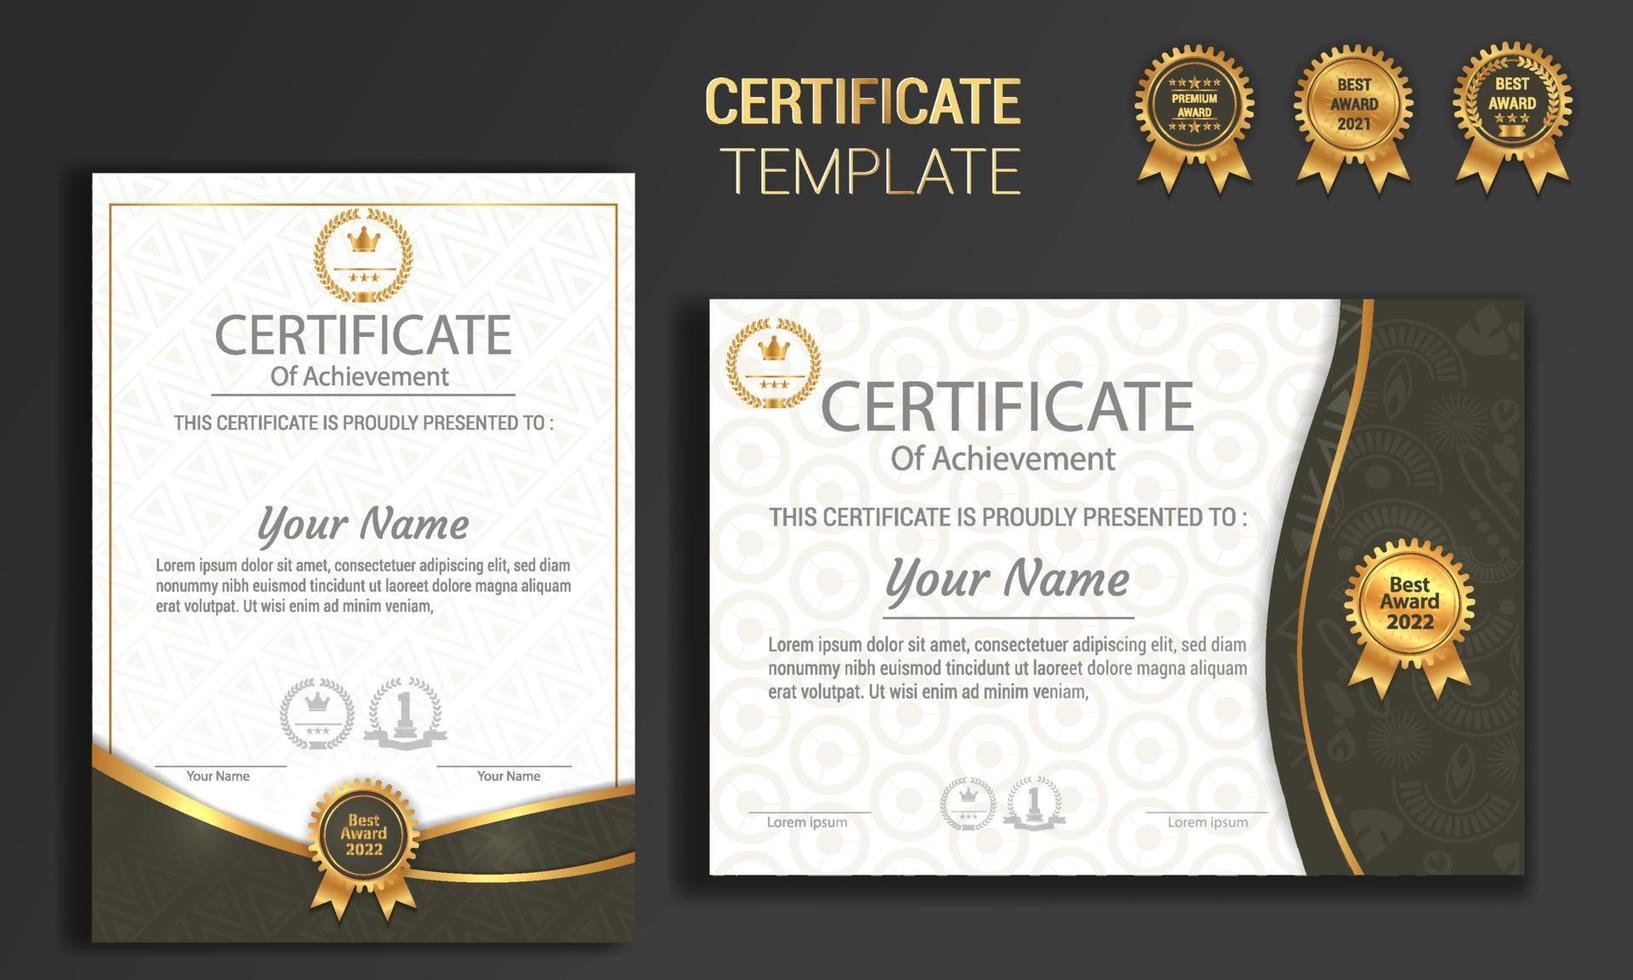 Certificate template with elegant corner frame and luxury realistic texture pattern, diploma premium badges design vector illustration